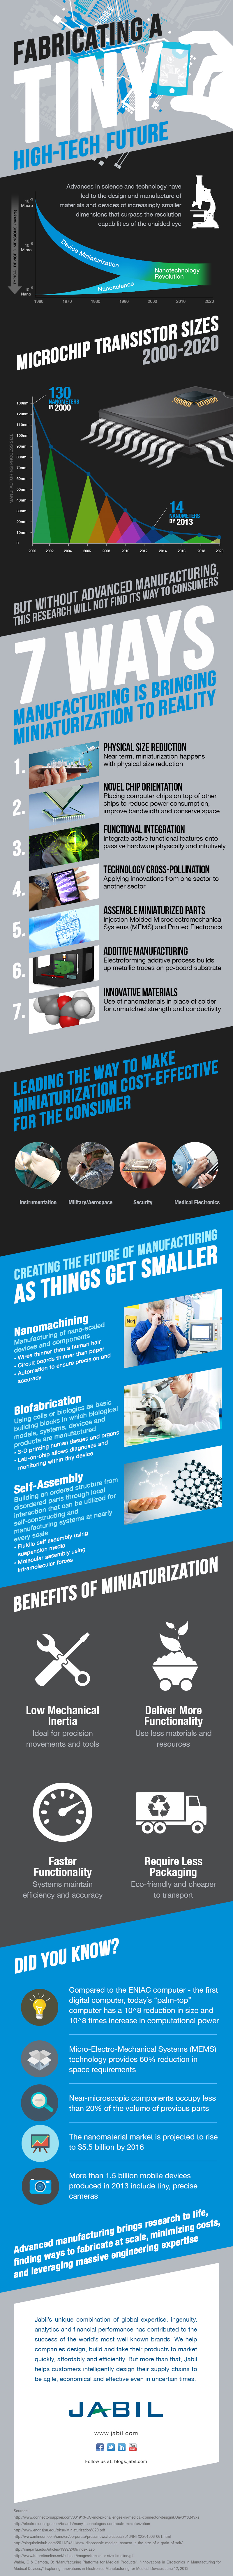 Nanotech: Shaping the Future of Multiple Industries